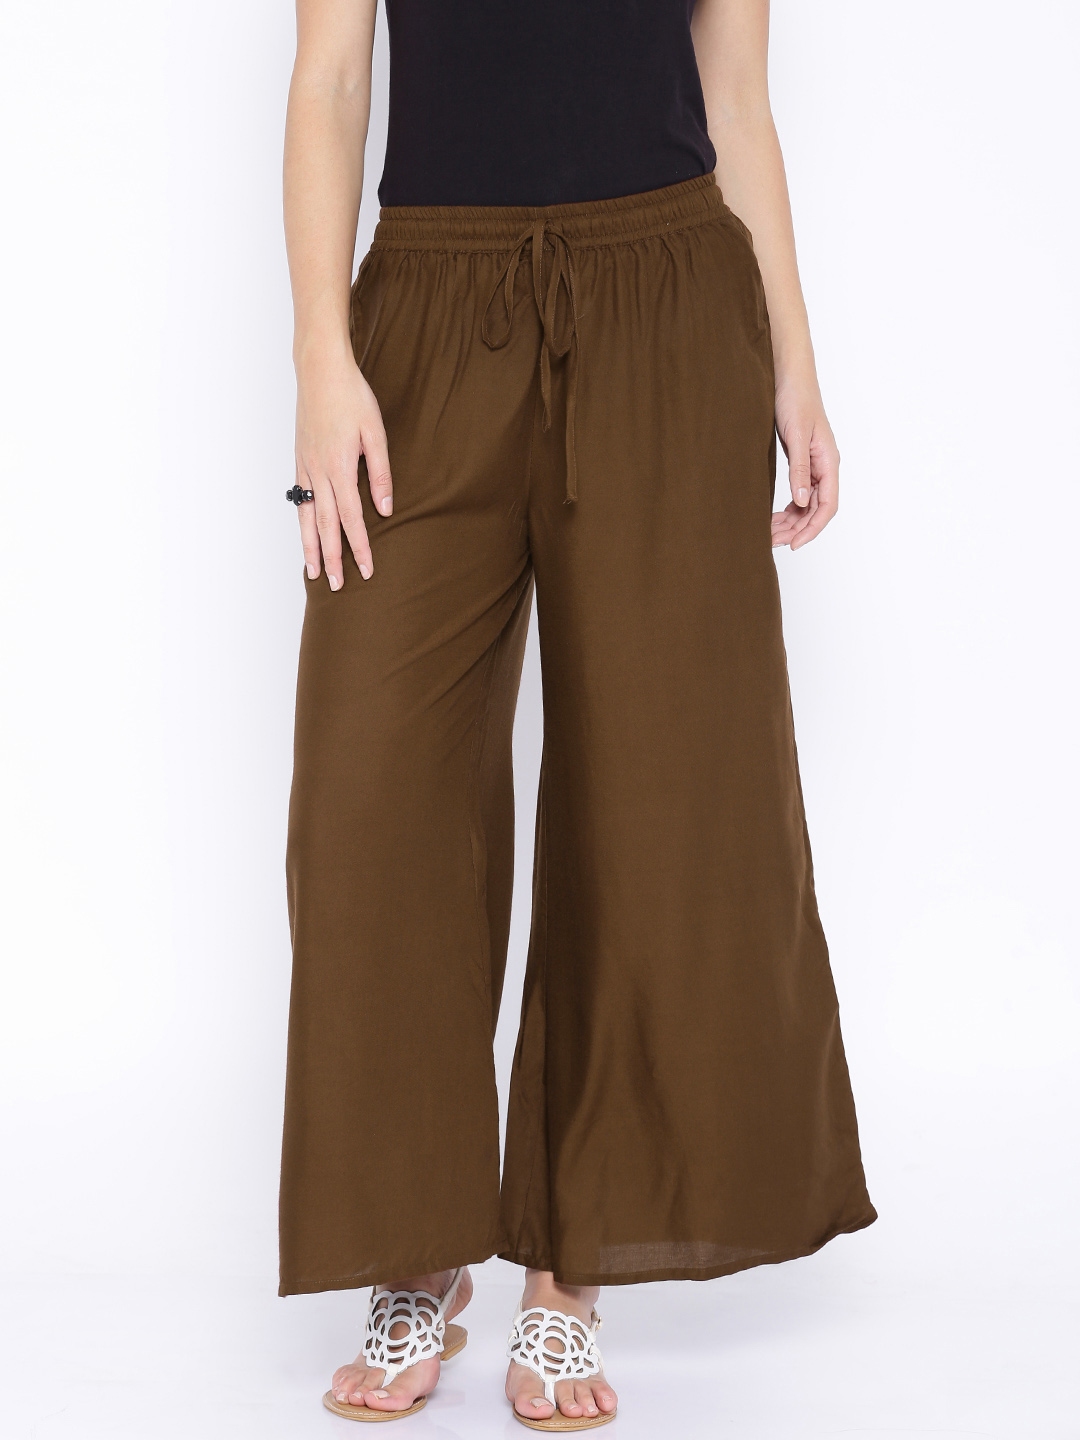 Buy Anouk Brown Palazzo Trousers - Trousers for Women 1376606 | Myntra